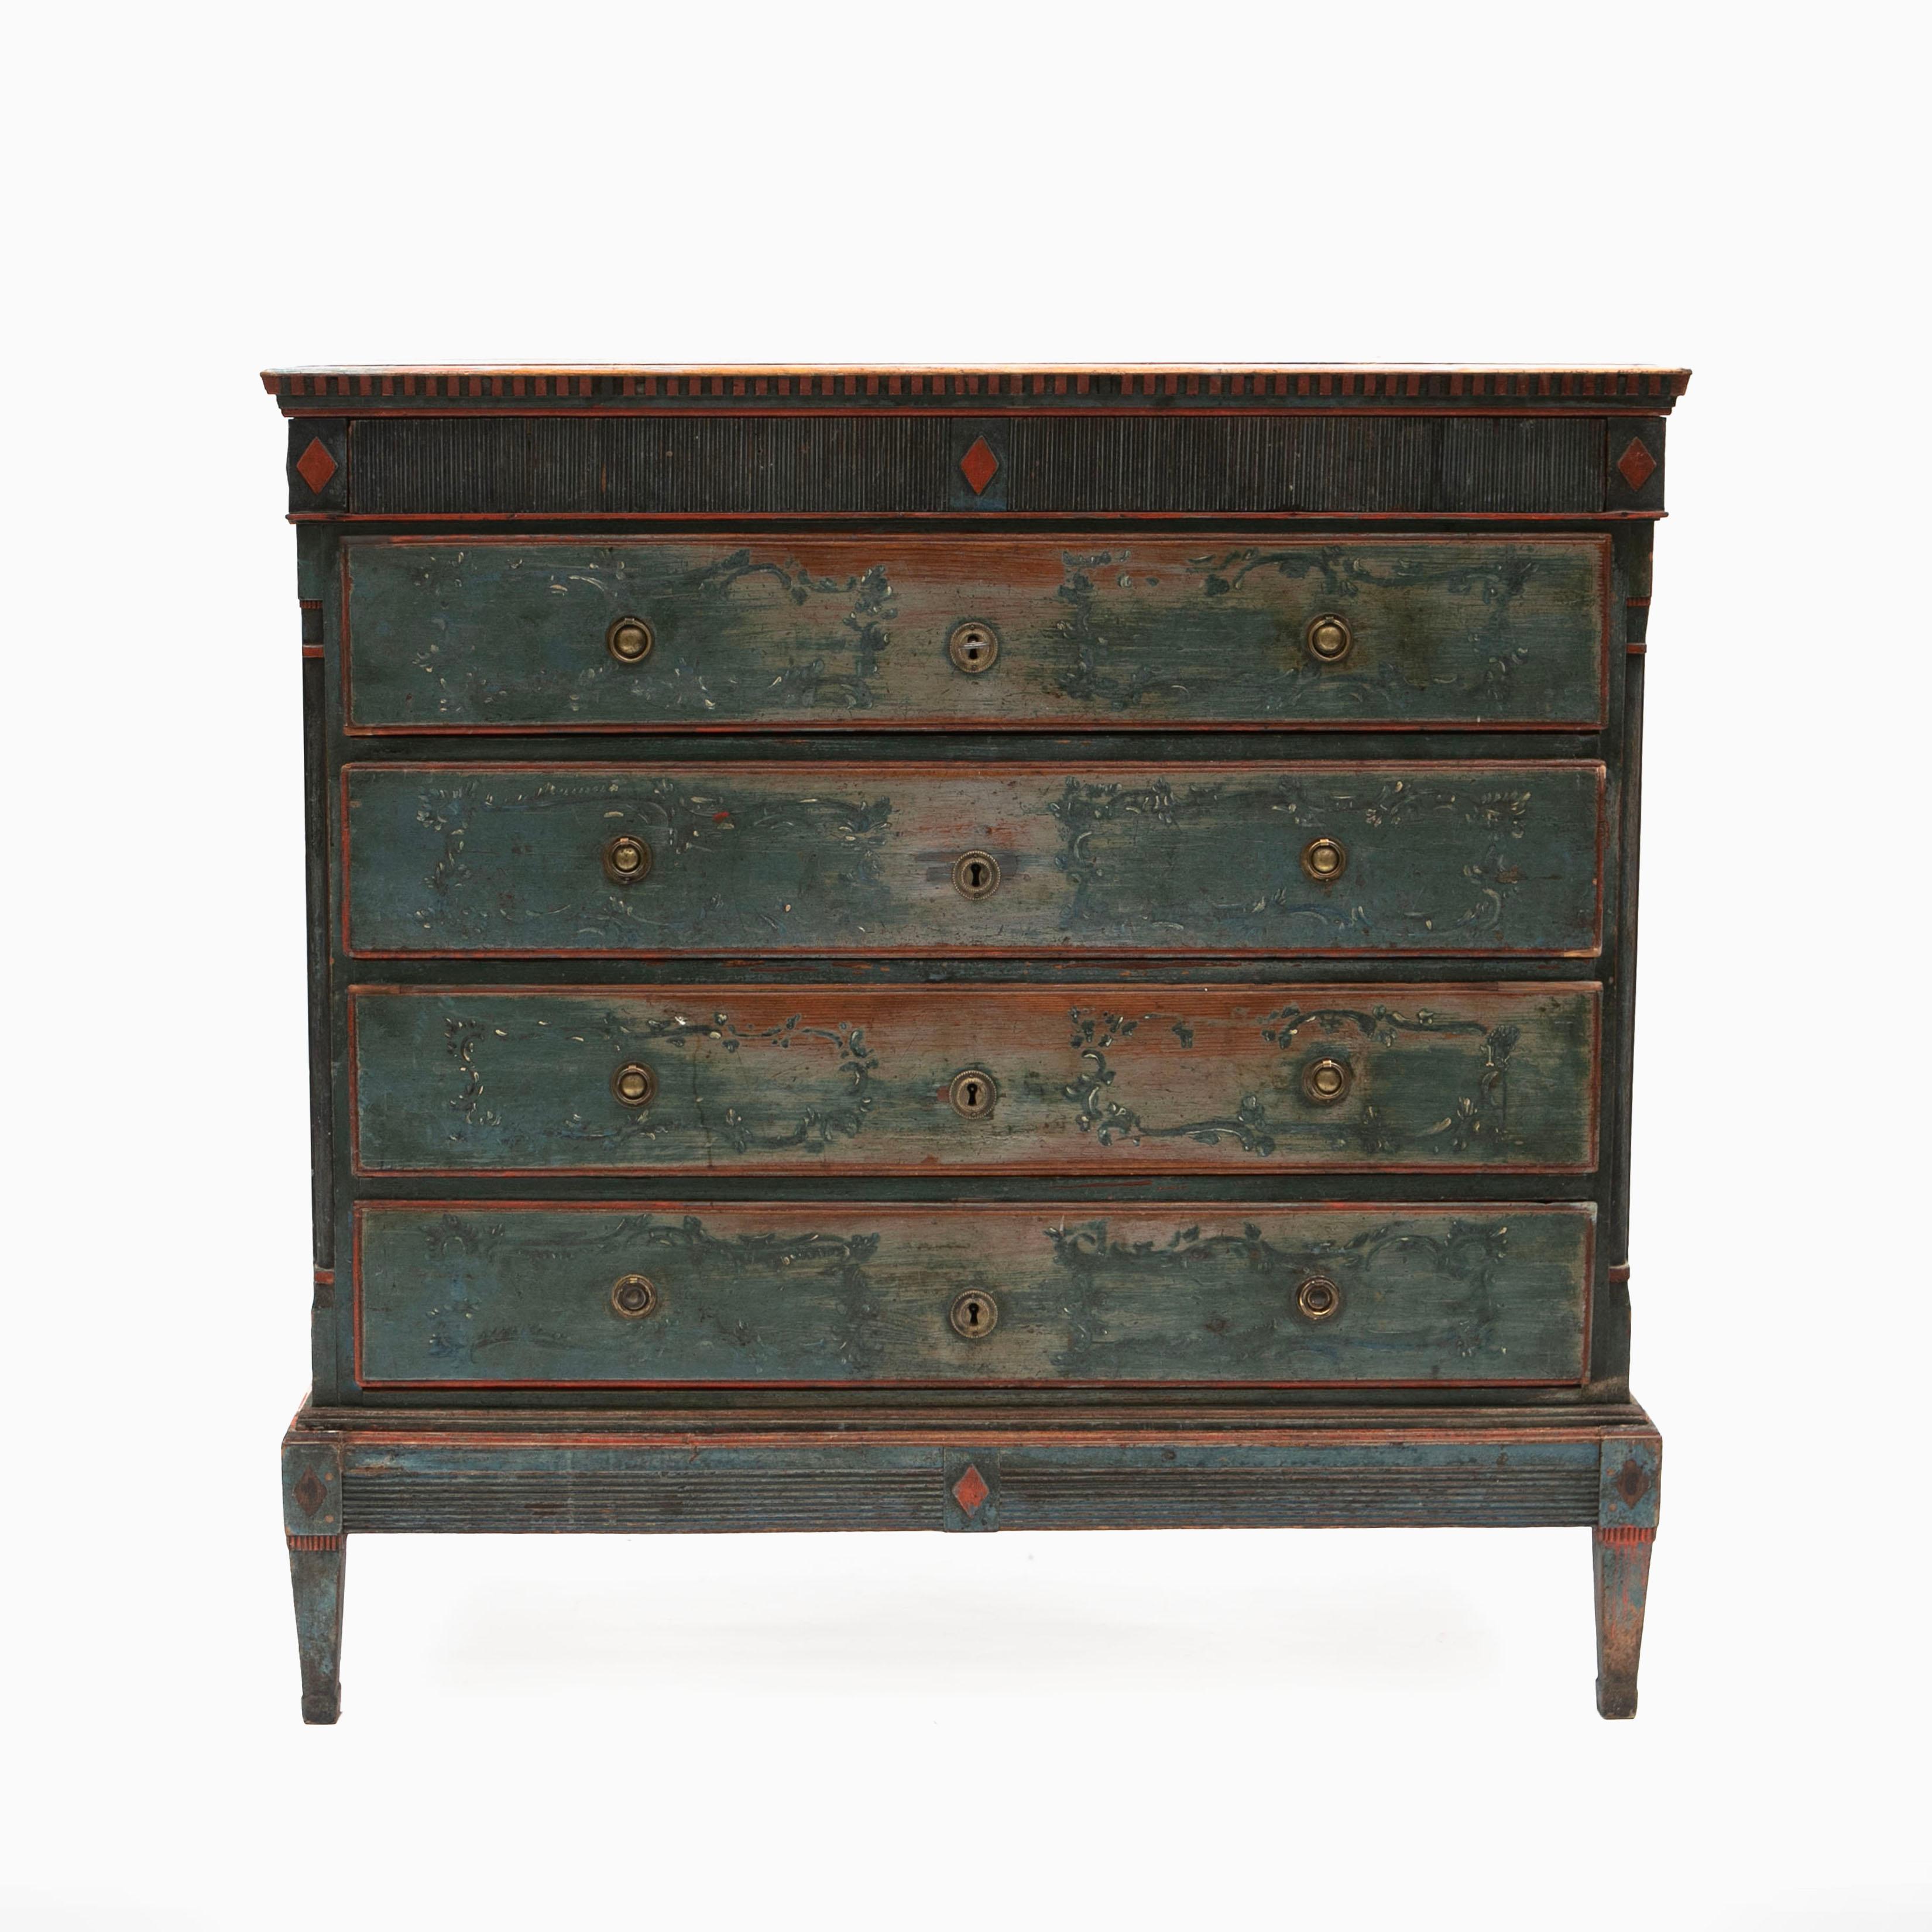 Very beautiful Louis XVI chest of drawers, crafted in pine in original polychrome color, with a fantastic natural age-related patina.
Below the top plate red painted dental mouldings.
The chest features 5 drawers: 4 lager drawers and a smaller